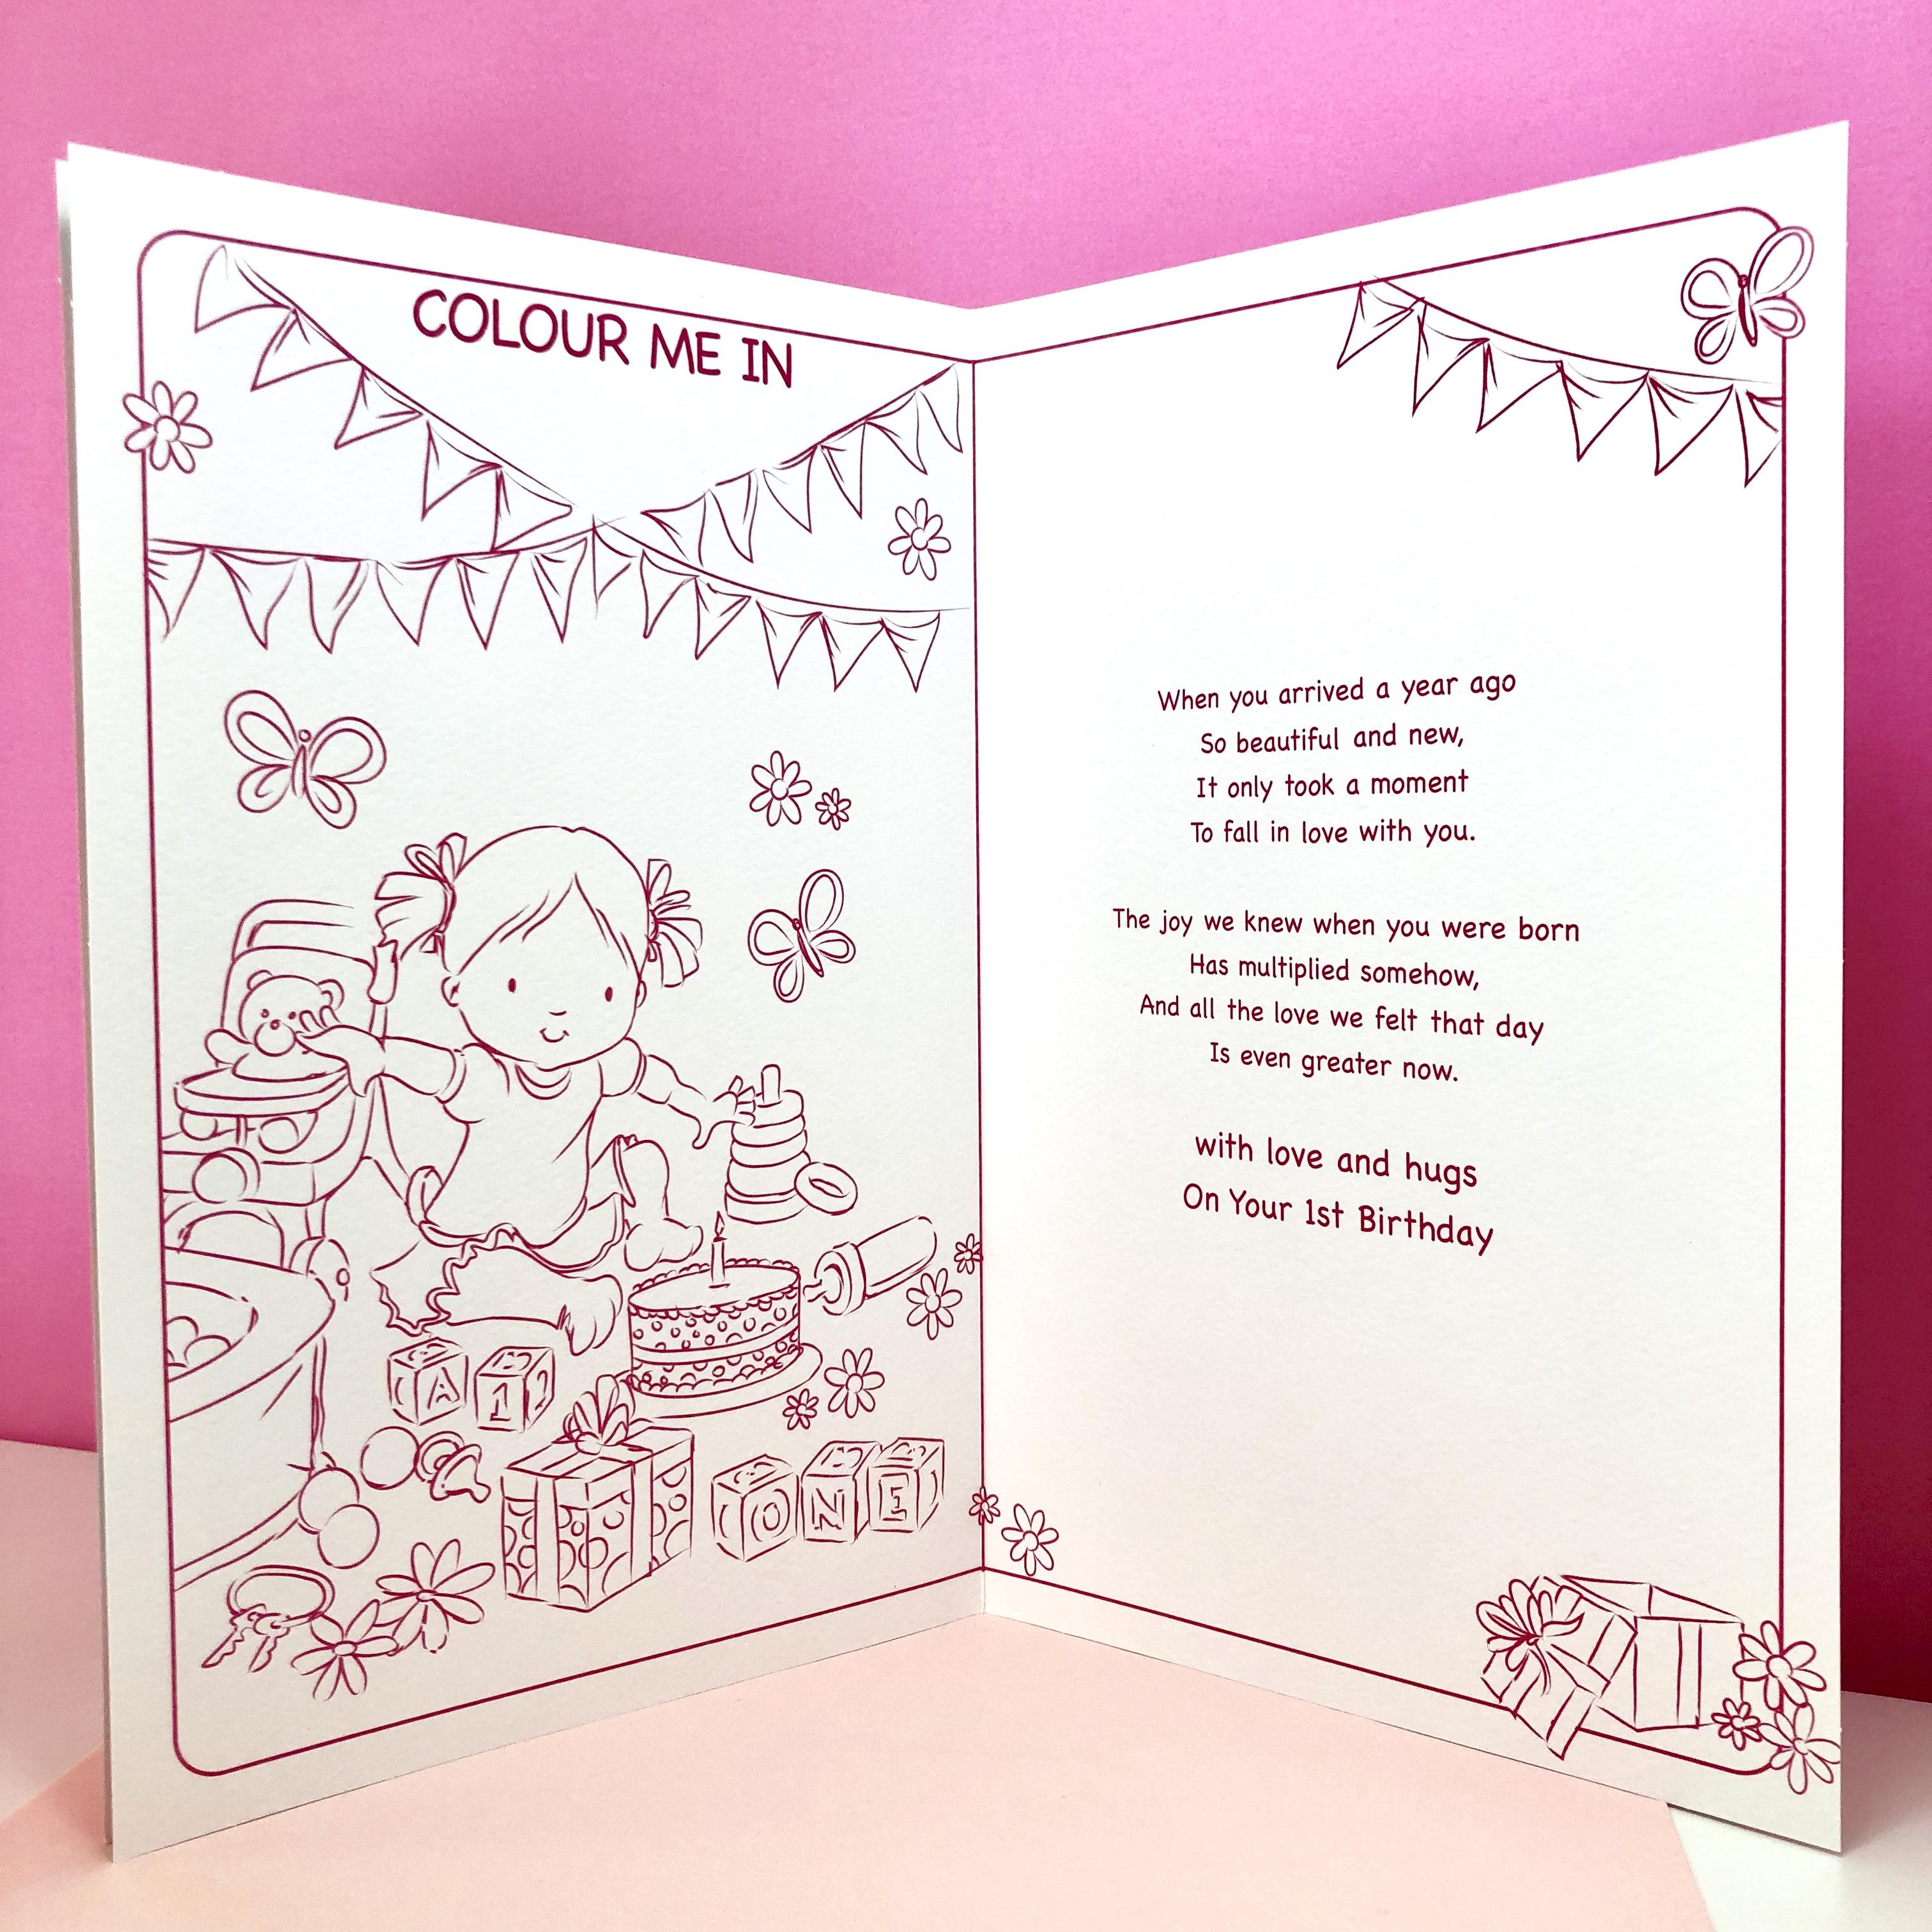 Inside Image Of Daughter 1st Birthday Card Showing Layout And Printed Text